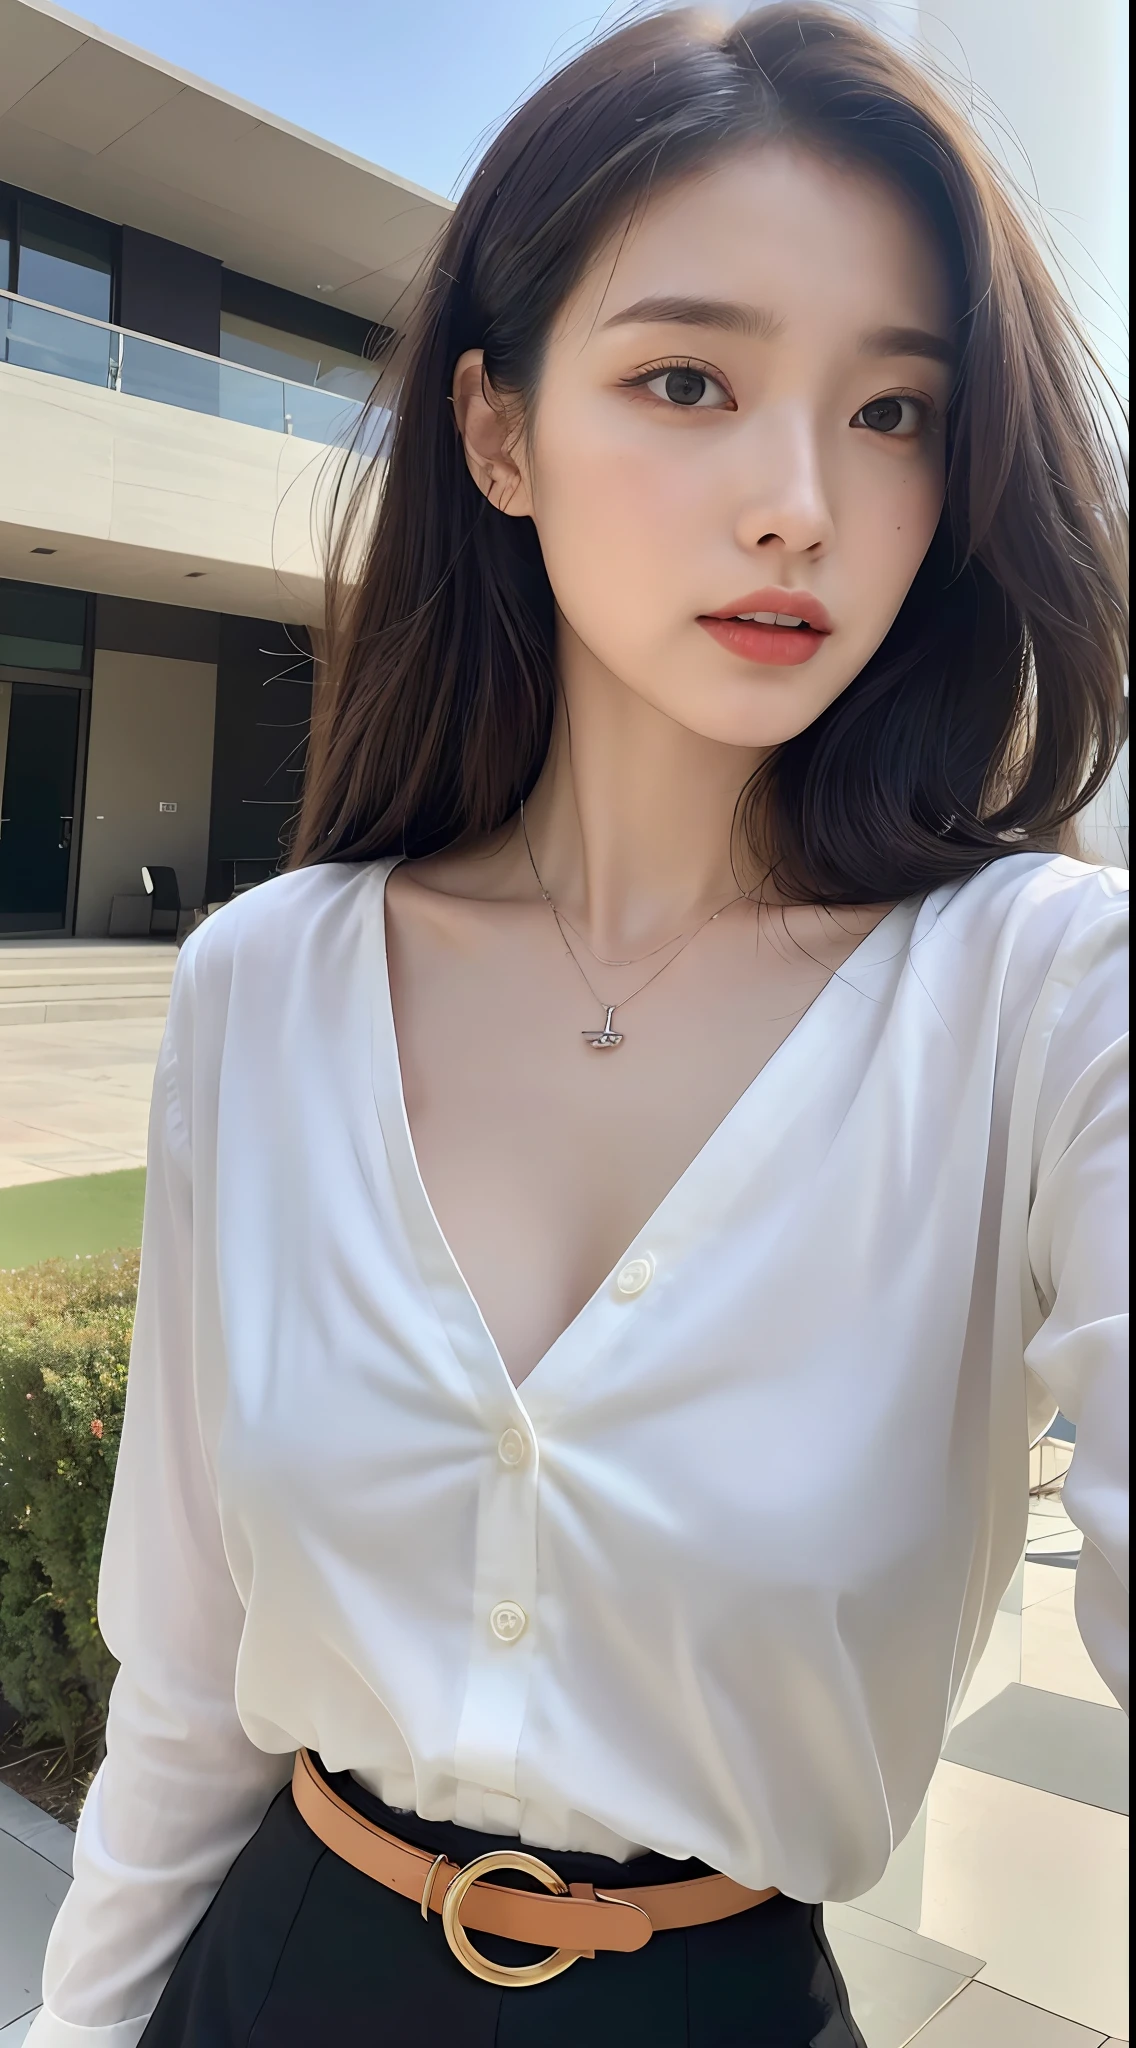 (highest quality, high resolution, masterpiece: 1.3), braless, bare skin-fitting shirt, tall and cute woman, big, slender abs, breasts, wearing pendant, white button-up shirt, belt, black skirt, (modern architecture in the background), exquisitely rendered details on face and skin texture, detailed eyes, double eyelids,